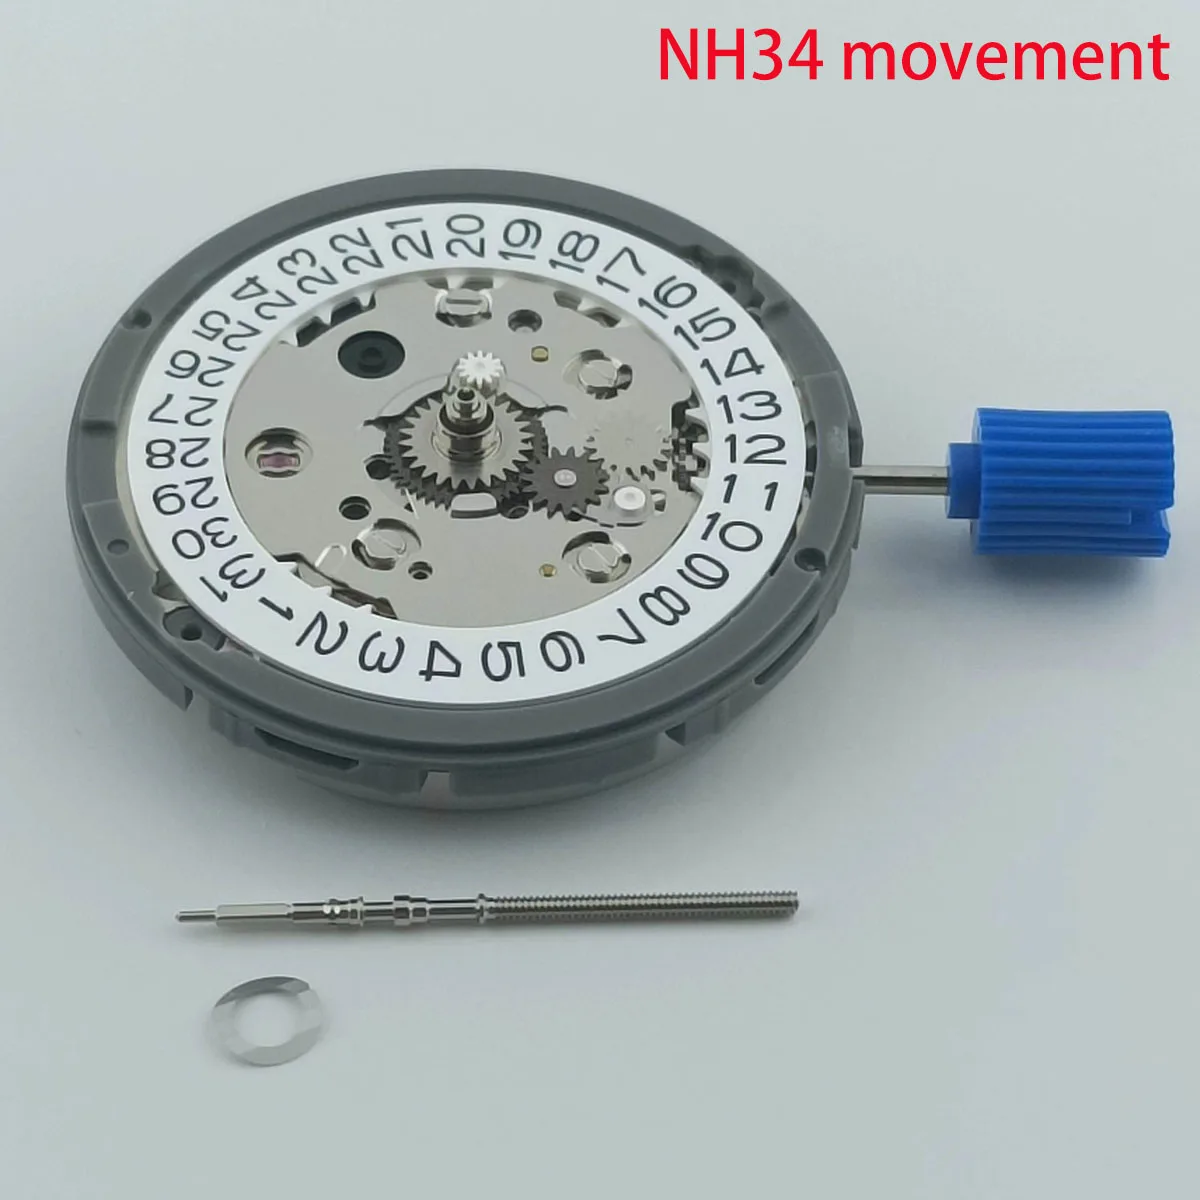 

NH34 Watch Movement GMT Original Japan Mechanical Automatic Date at 3 o'clock Self-winding High Accuracy Watches Repair Tool